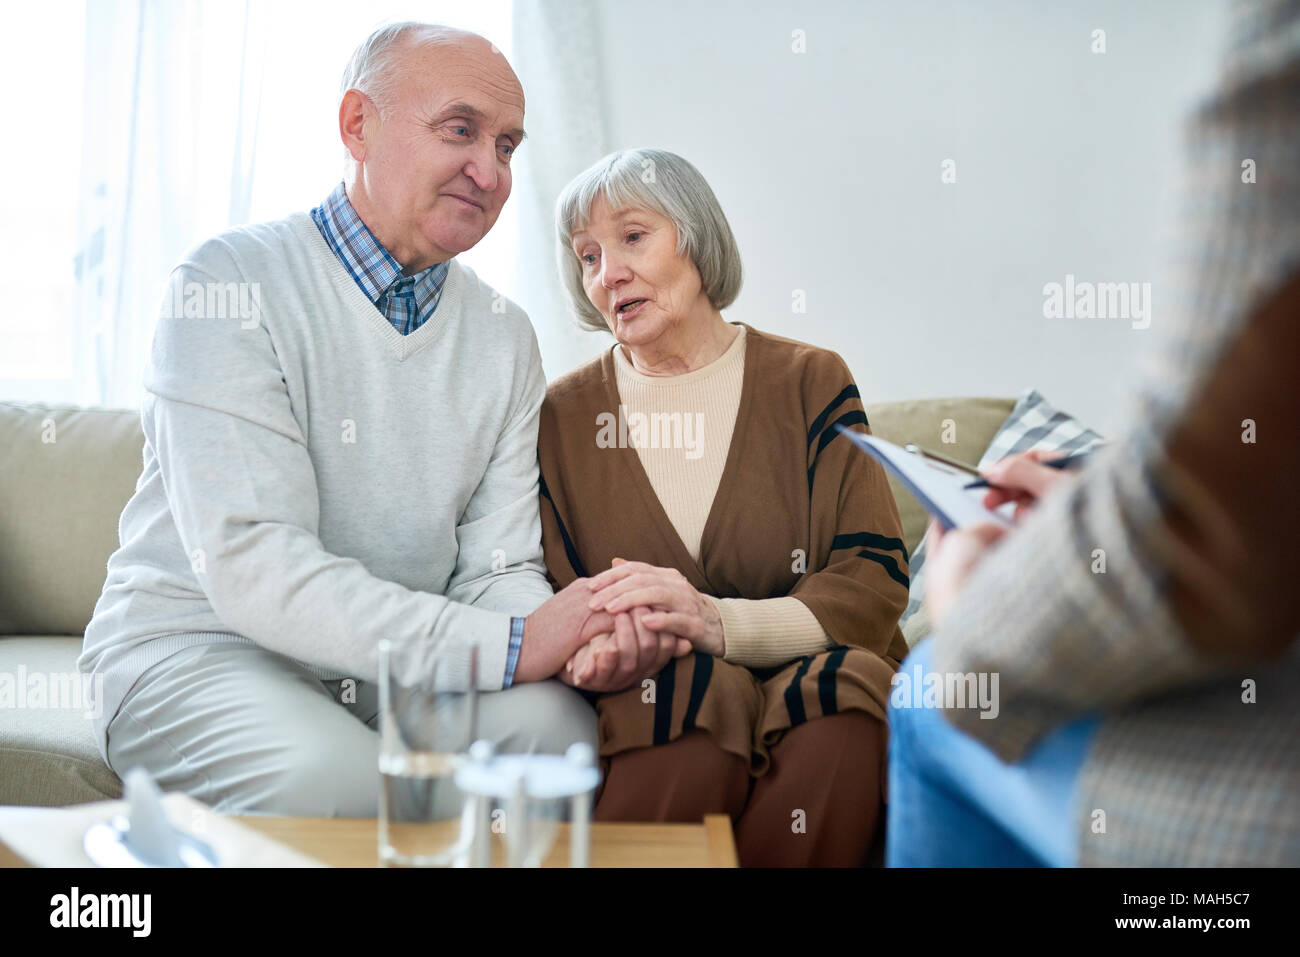 Senior Couple in Therapy Session Stock Photo